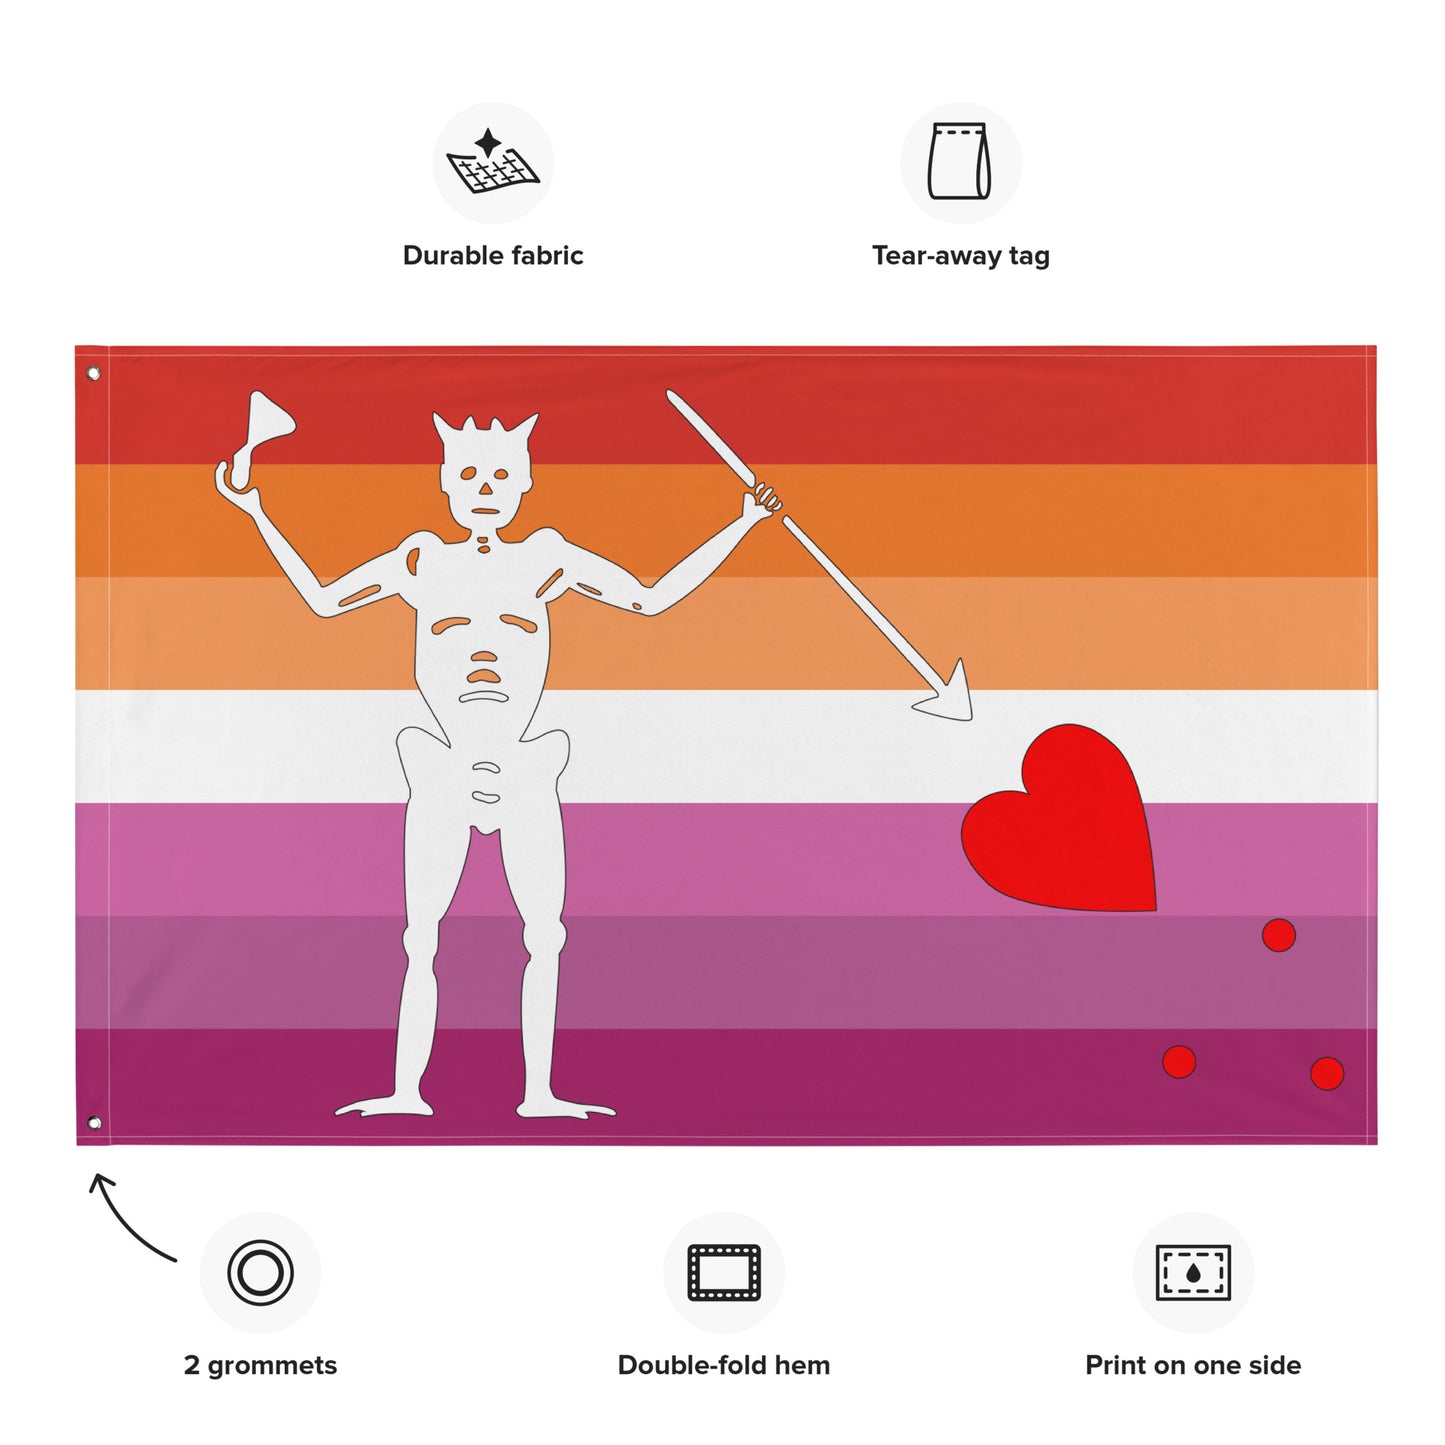 the lesbian flag with blackbeard's symbol surrounded by the specifications of "durable fabric, tear-away tag, 2 grommets, double-fold hem, print on one side"